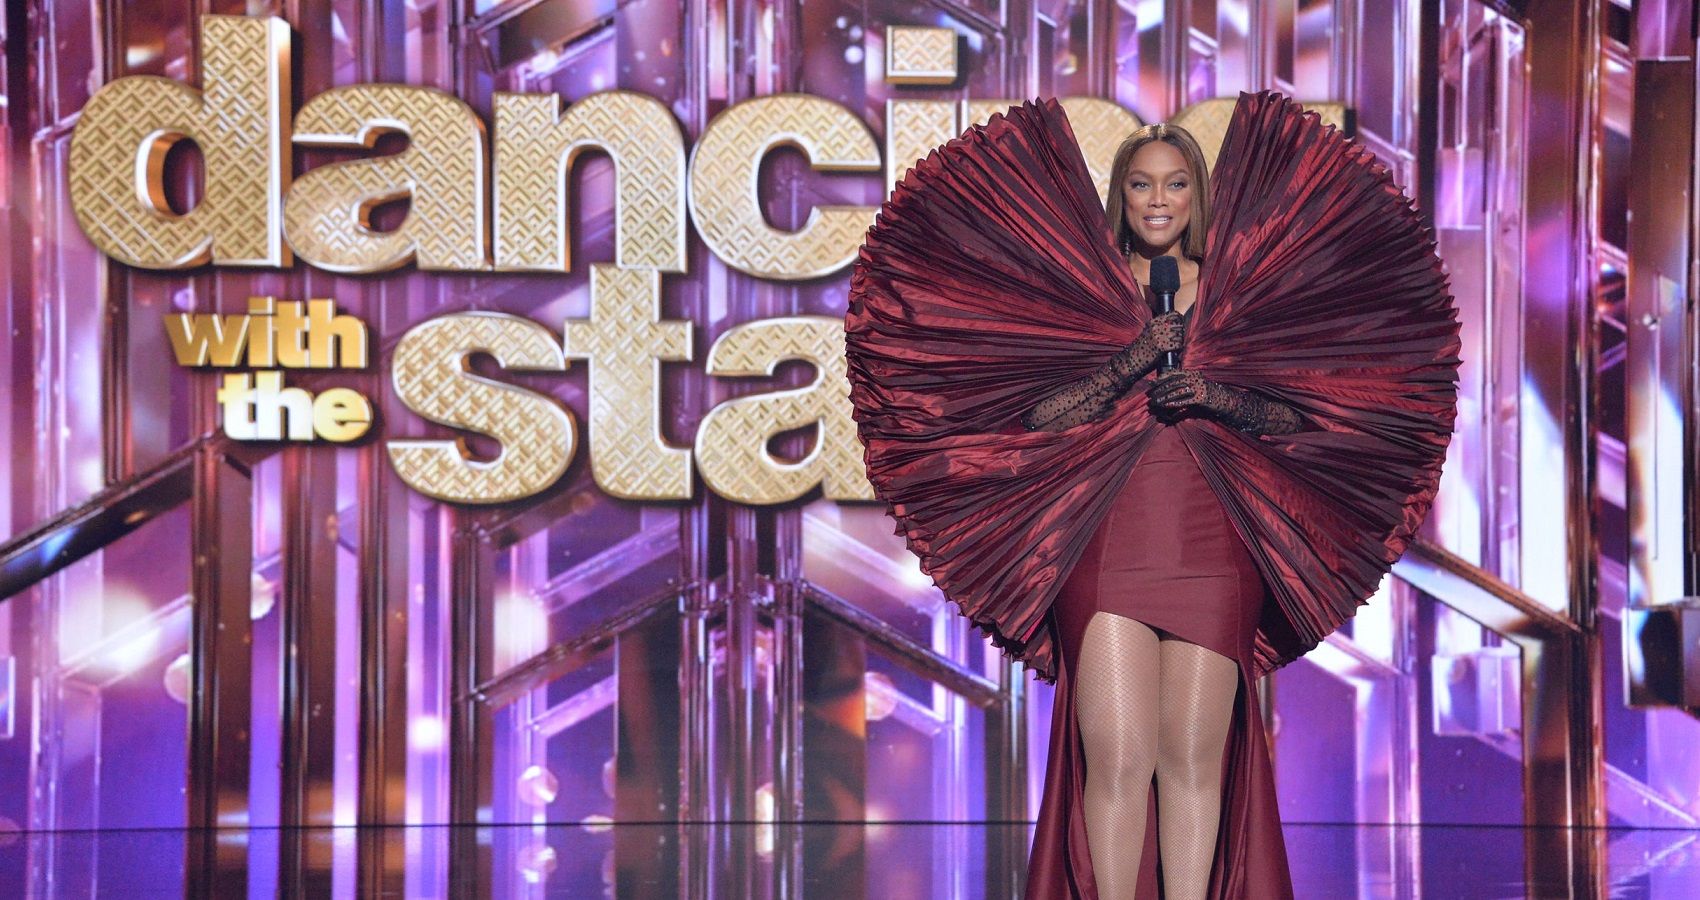 Tyra Banks wearing an elaborate red dress on the Dancing with the Stars stage